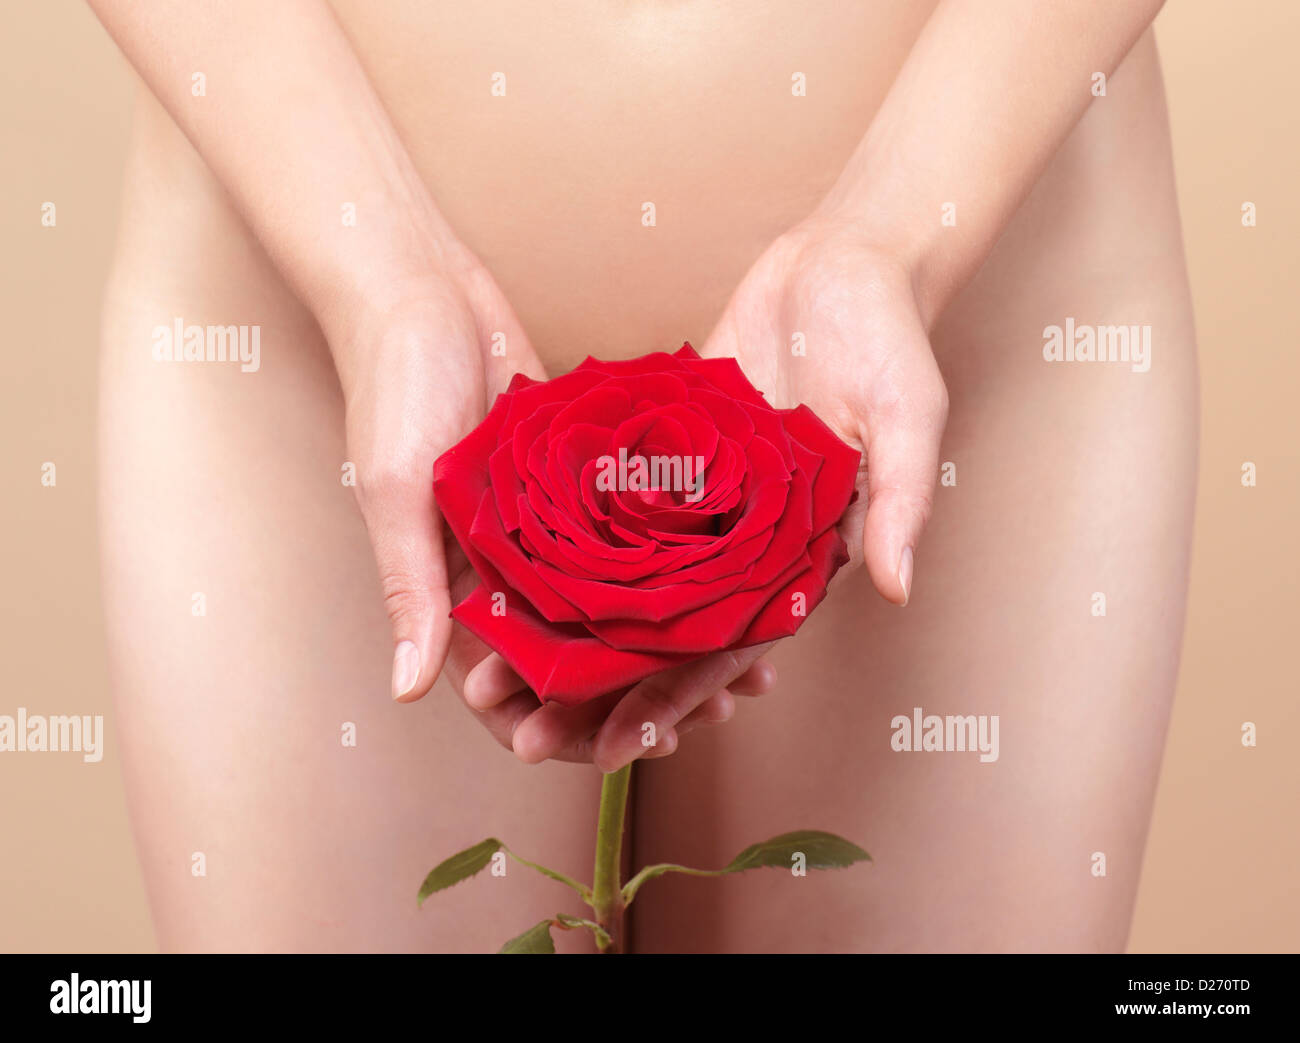 Black guy holding flower infront of naked woman art Nude Woman Holding A Red Rose In Front Of Her Naked Body Womens Health Concept Stock Photo Alamy